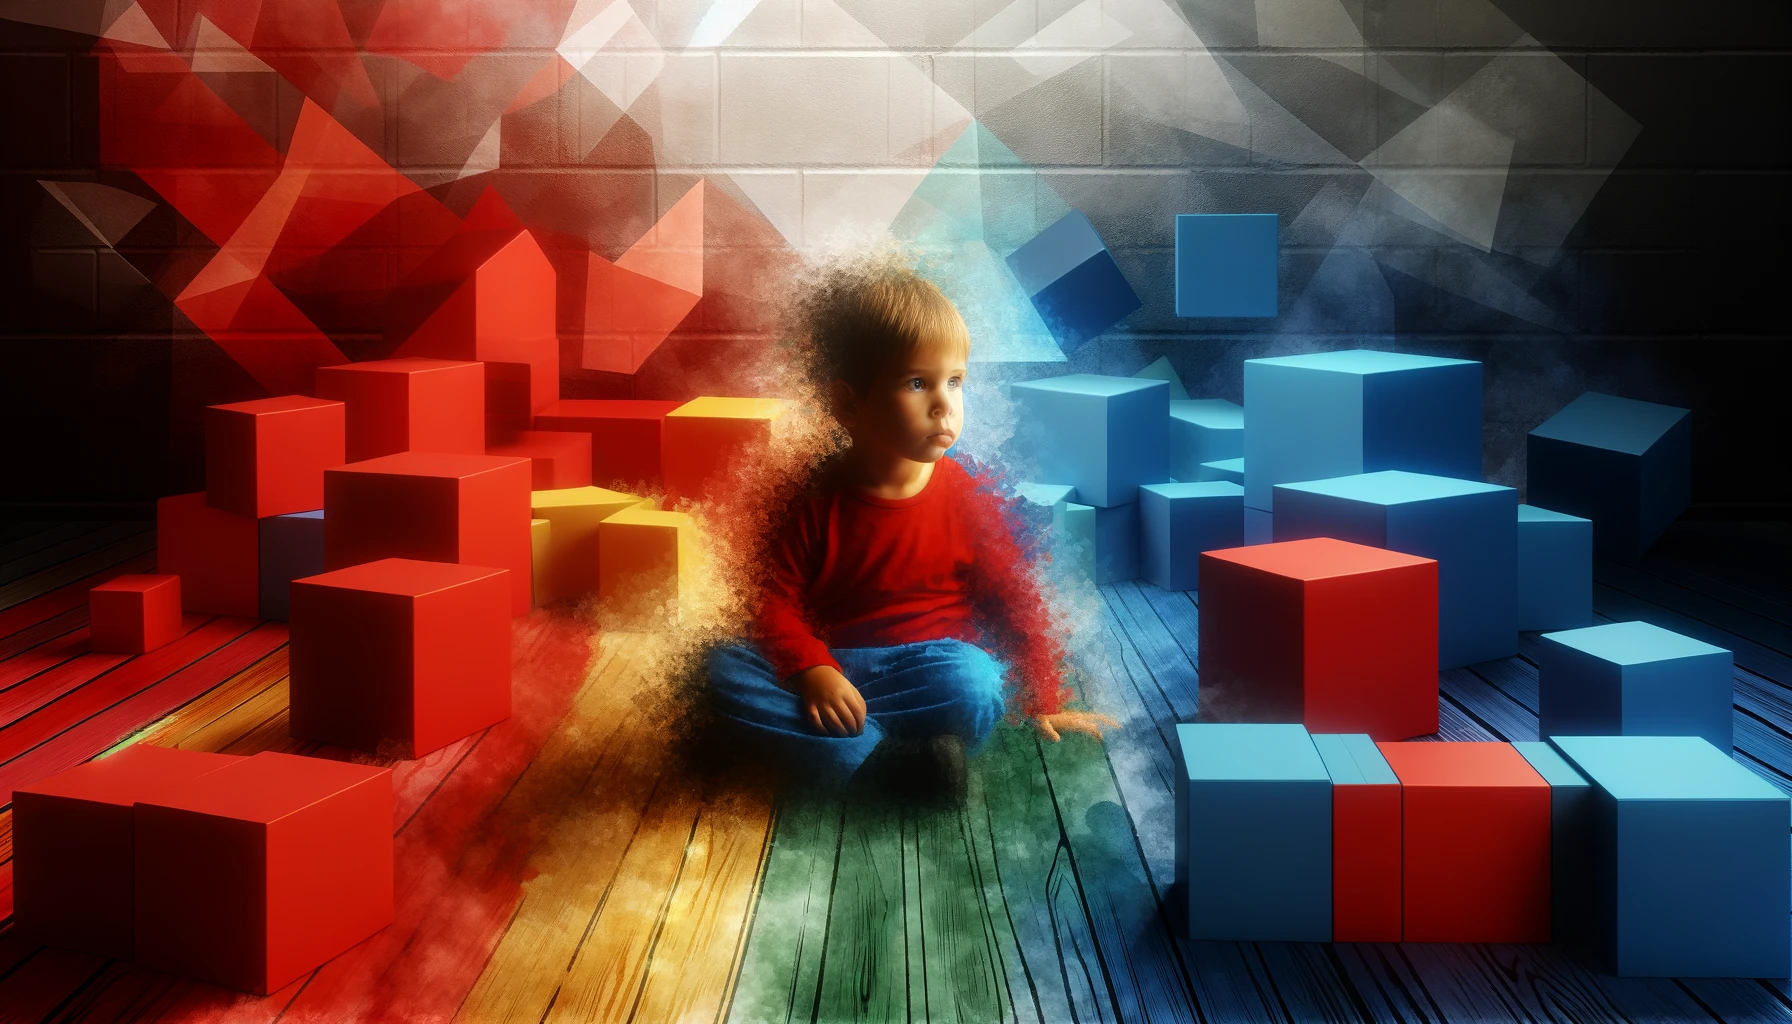 A solitary child in a playroom, wearing bright red and blue, plays with colorful blocks, surrounded by fading grays, symbolizing isolation and developmental challenges during the pandemic.